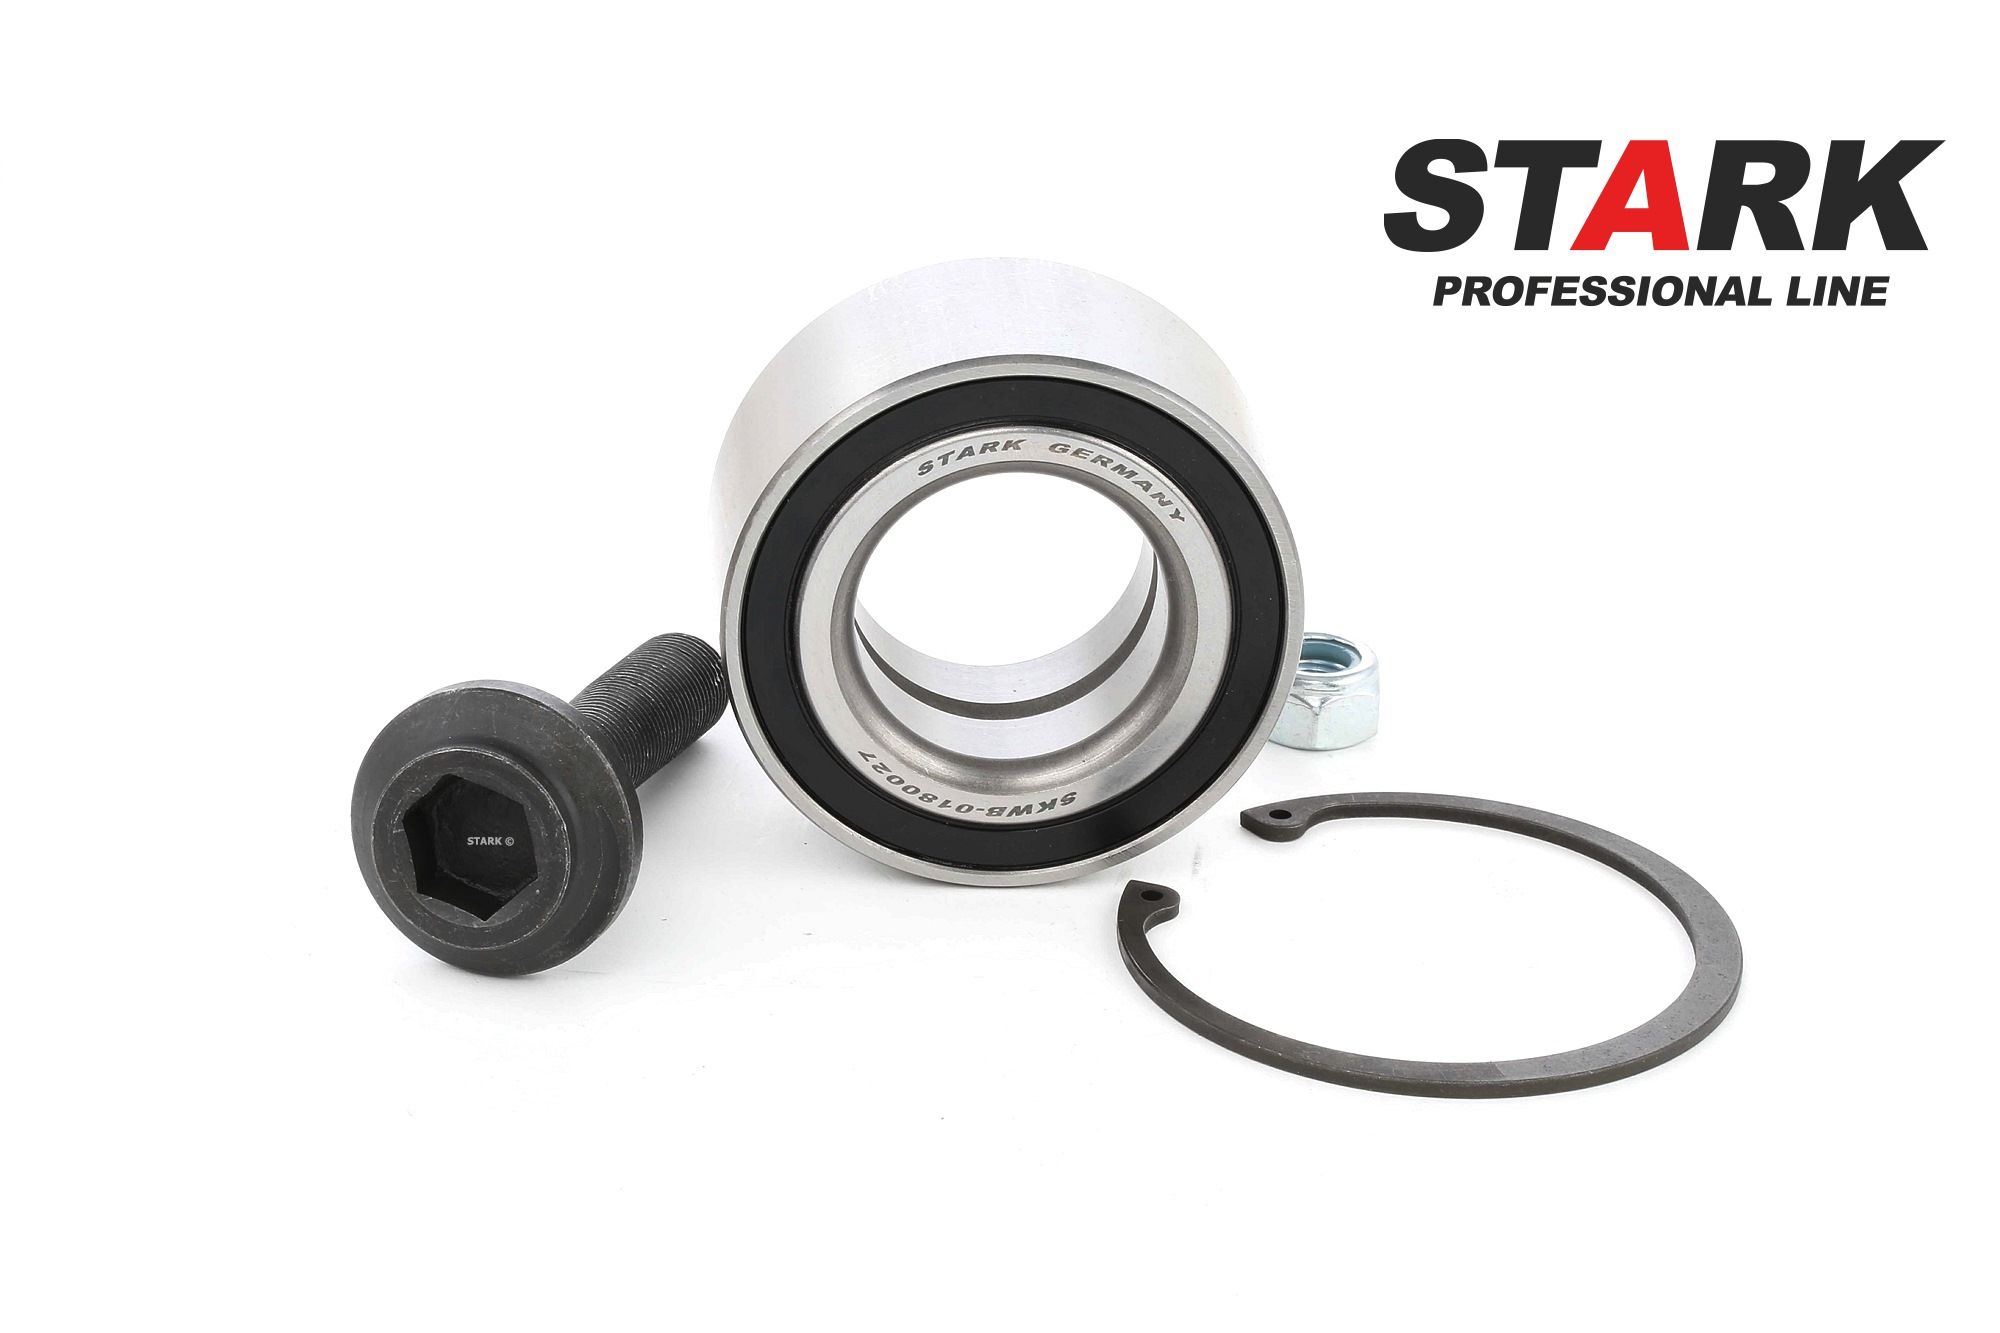 STARK SKWB-0180027 Wheel bearing kit Front Axle, without ABS sensor ring, 80 mm